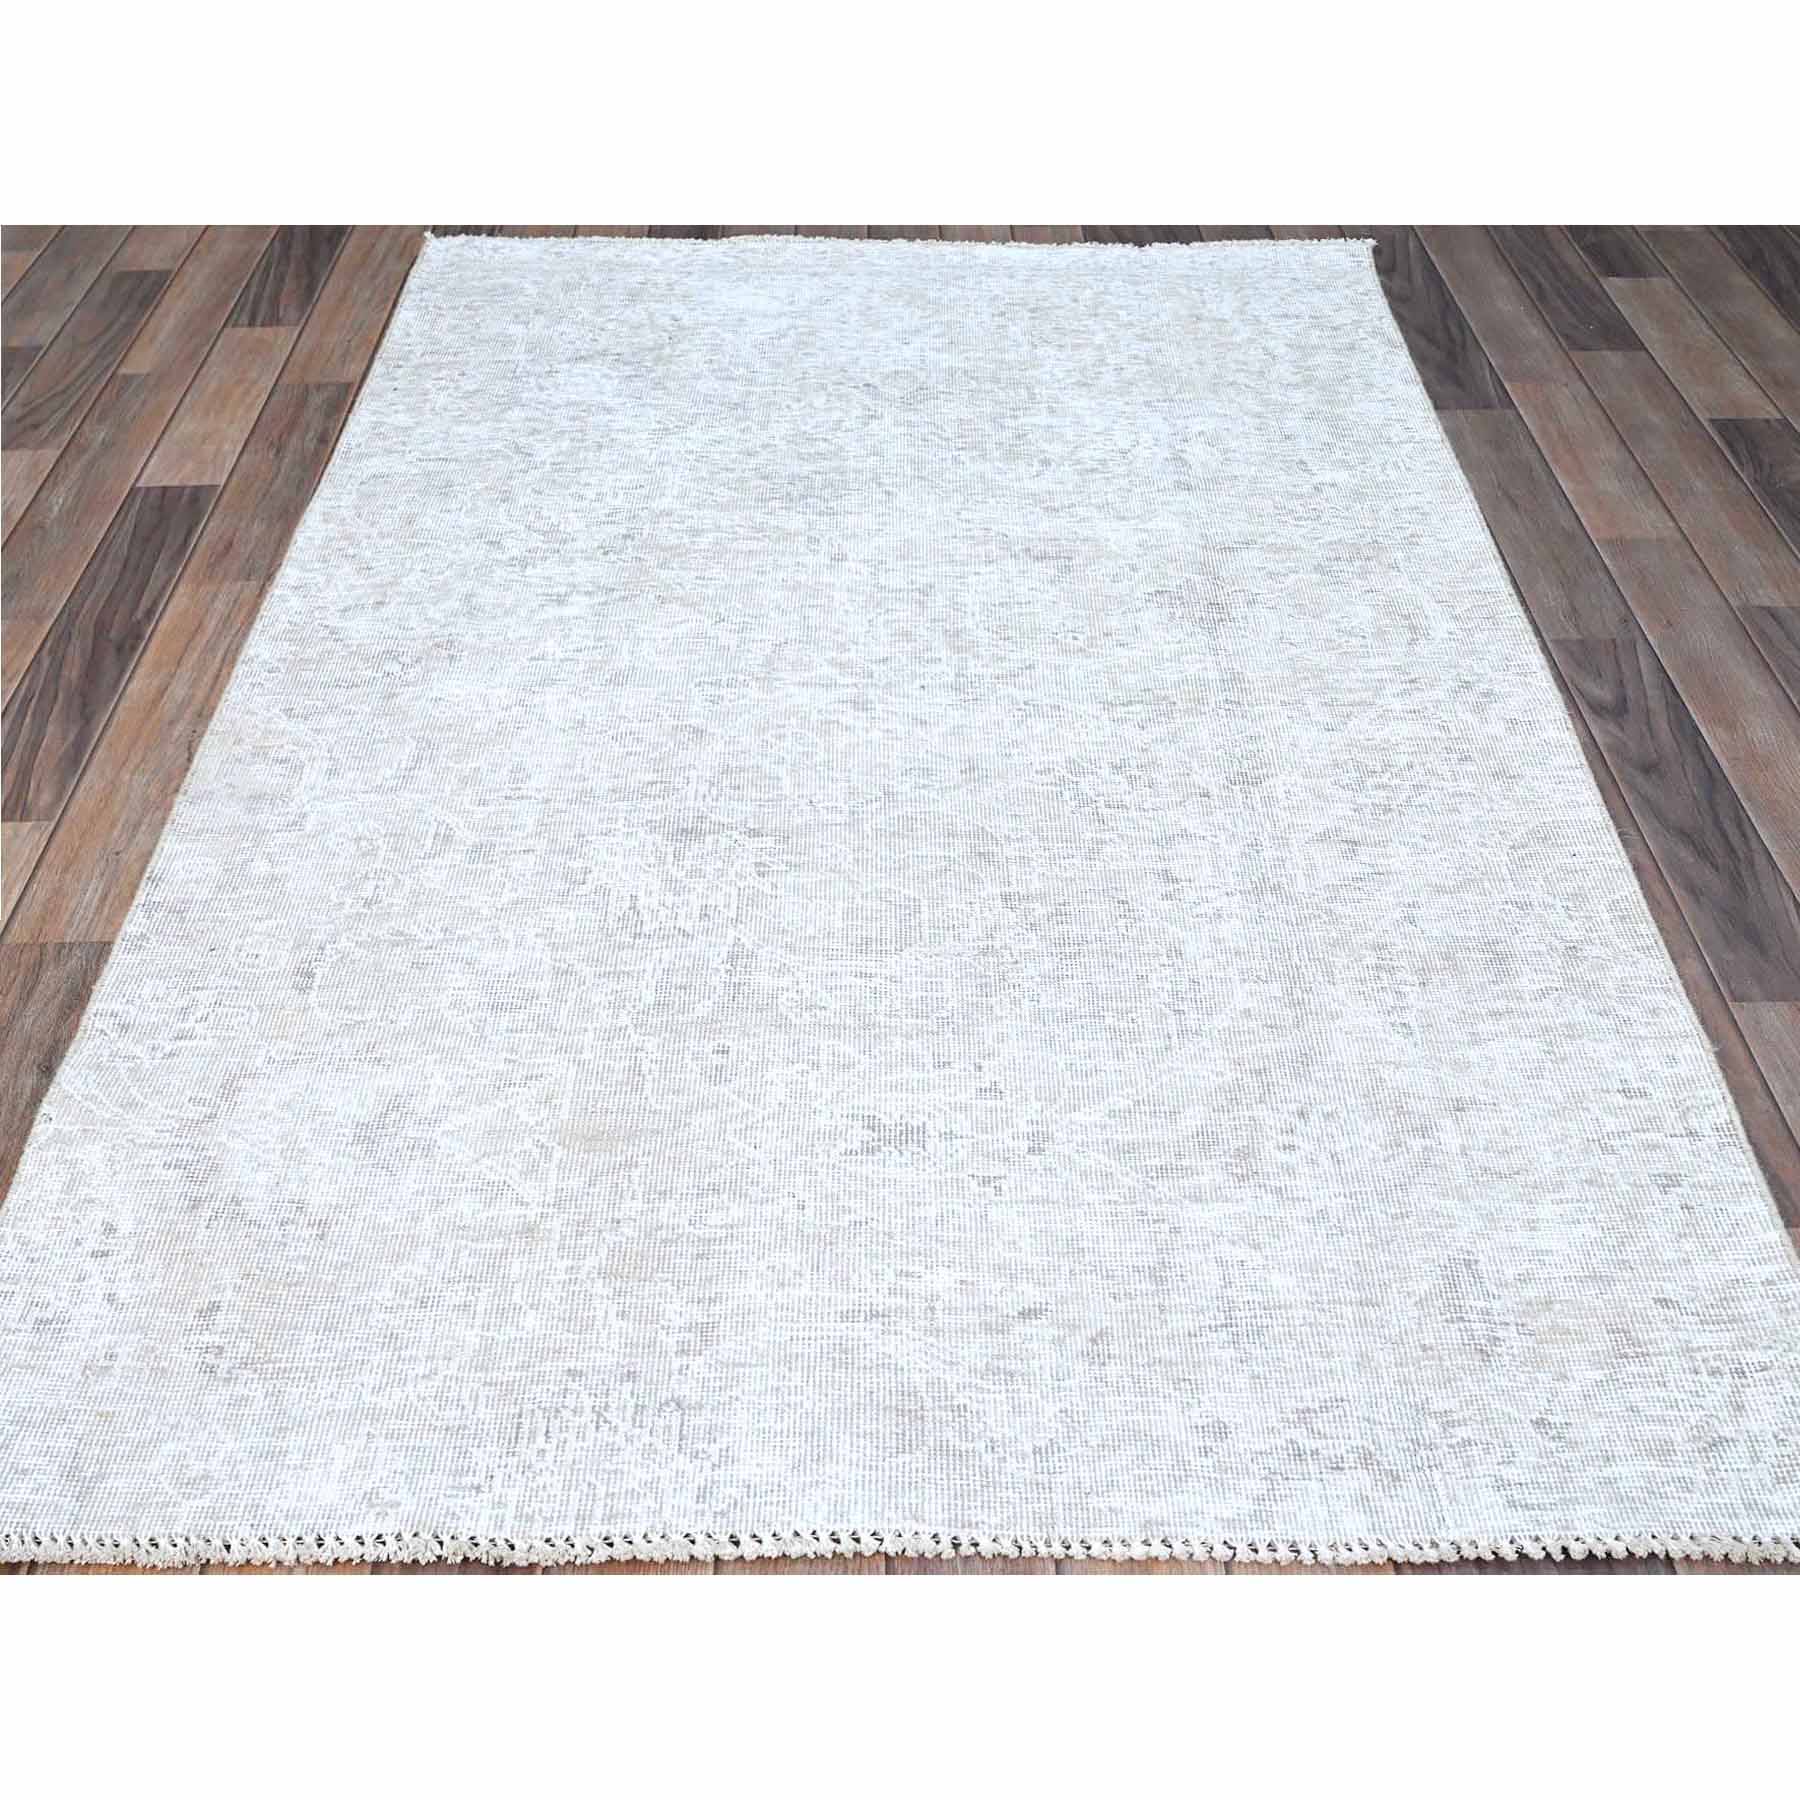 Overdyed-Vintage-Hand-Knotted-Rug-1175